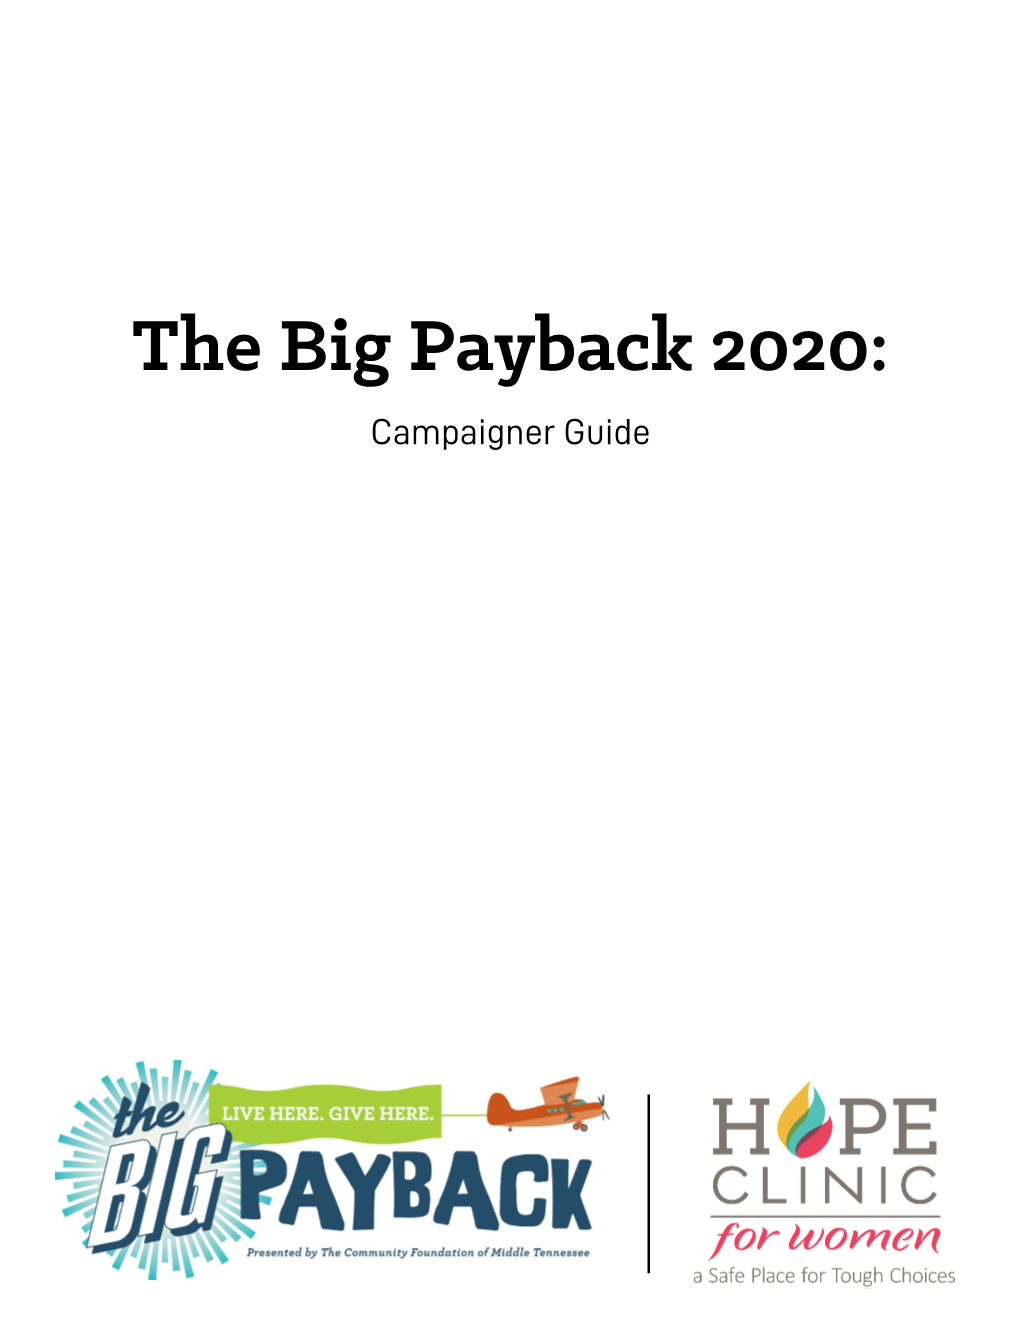 The Big Payback 2020: Campaigner Guide